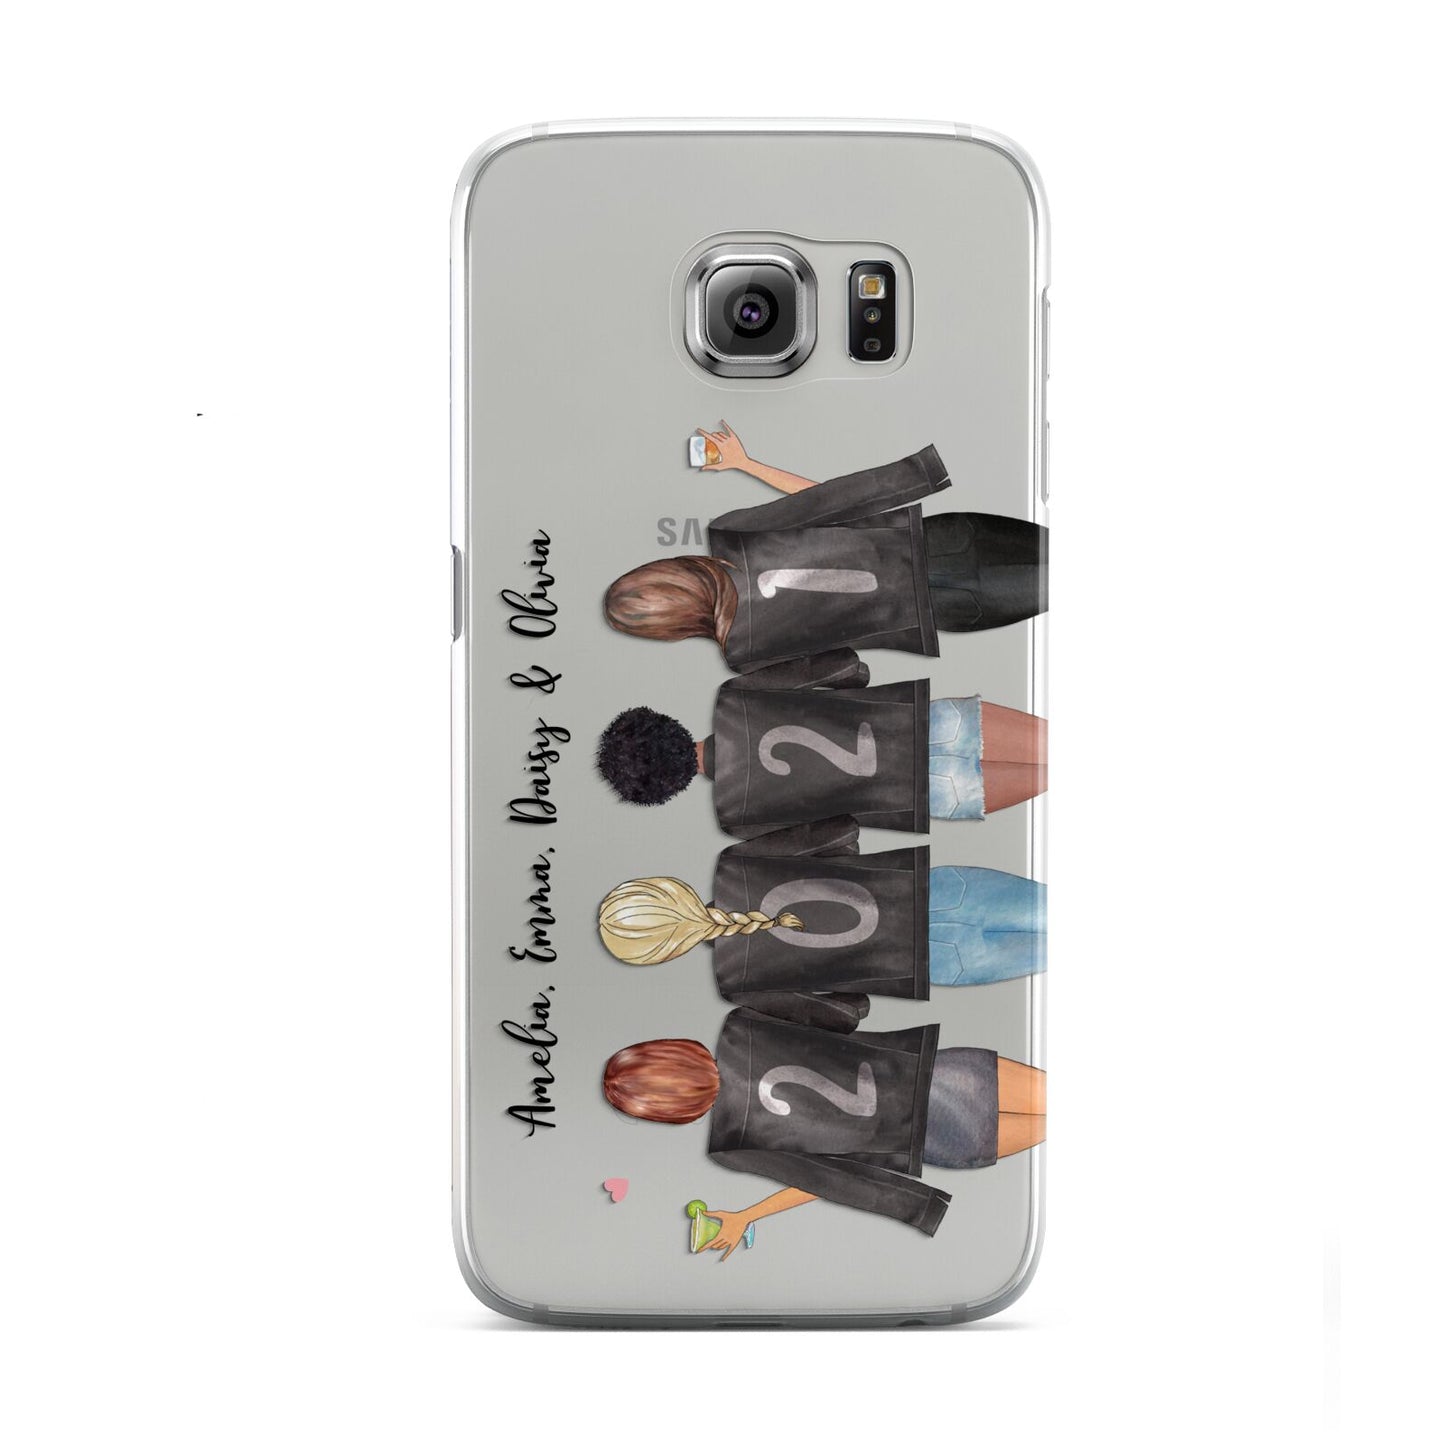 4 Best Friends with Names Samsung Galaxy S6 Case